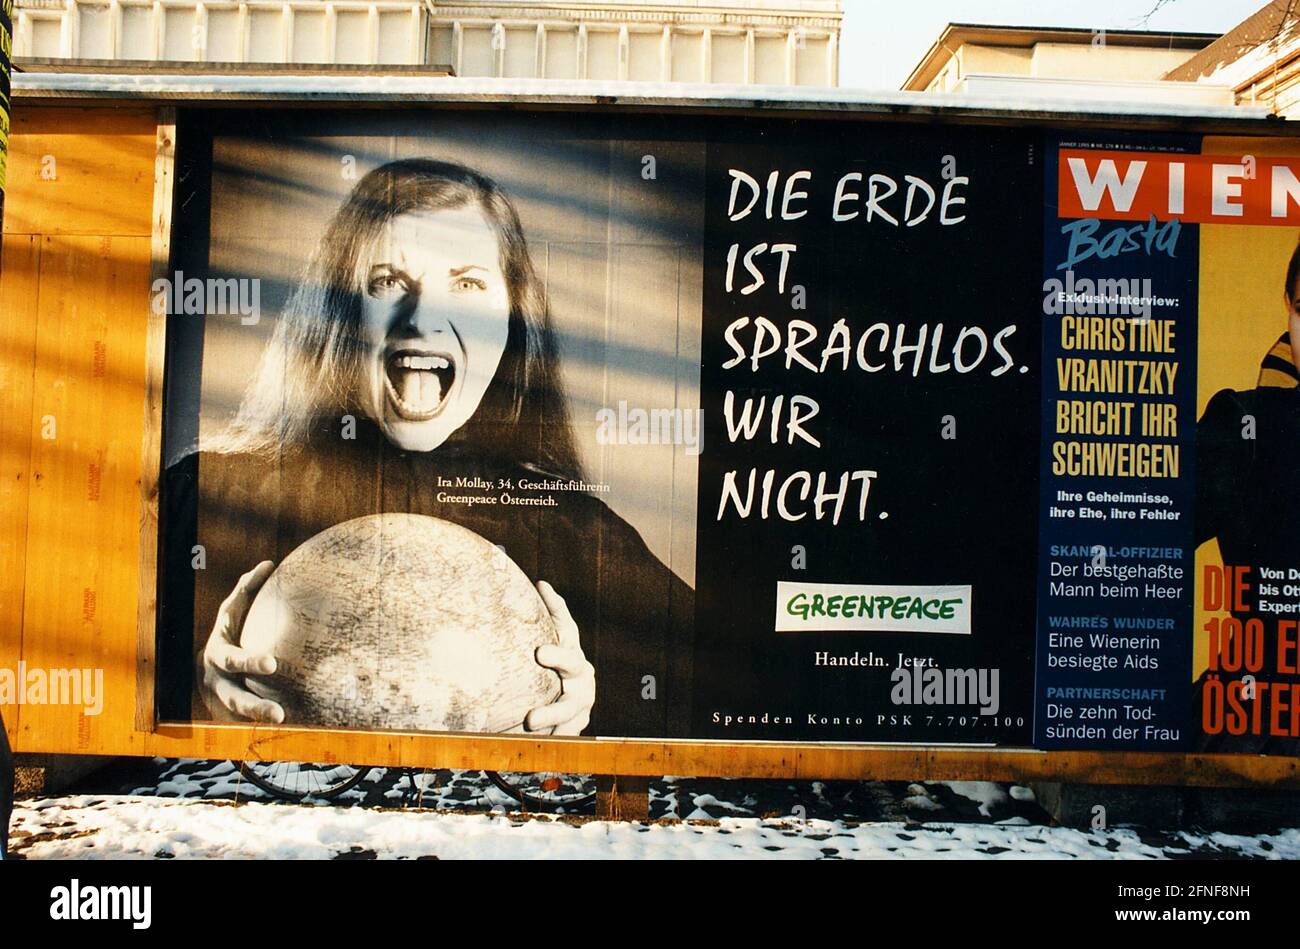 https://c8.alamy.com/comp/2FNF8NH/poster-advertisement-of-the-environmental-organization-greenpeace-in-bregenz-january-1995-ira-mollay-managing-director-of-greenpeace-austria-is-pictured-automated-translation-2FNF8NH.jpg